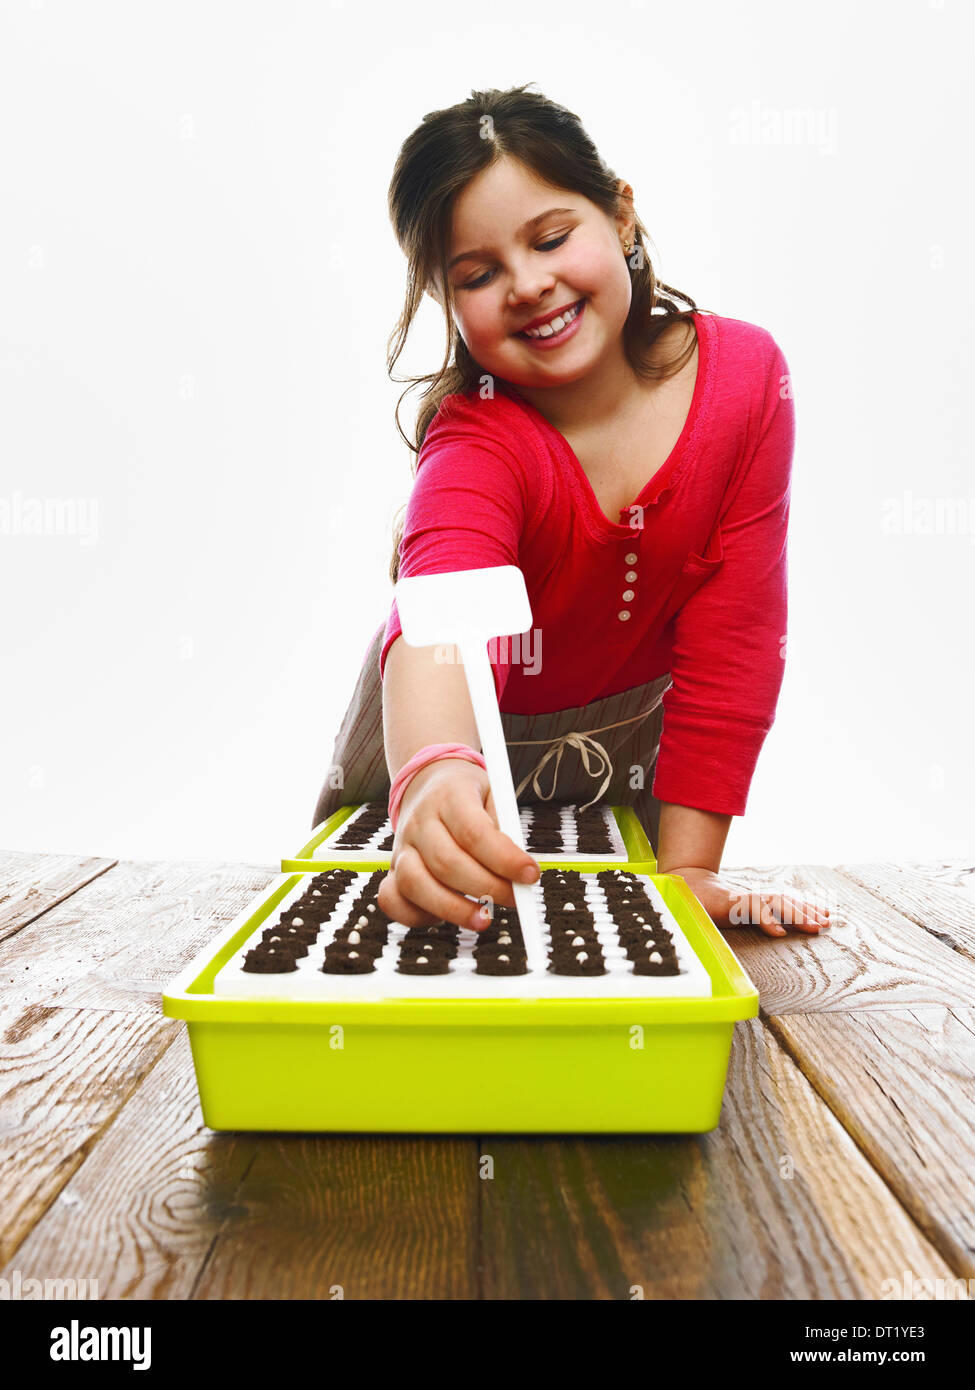 A young girl planting seeds in a modular seed tray with dark organic soil Stock Photo